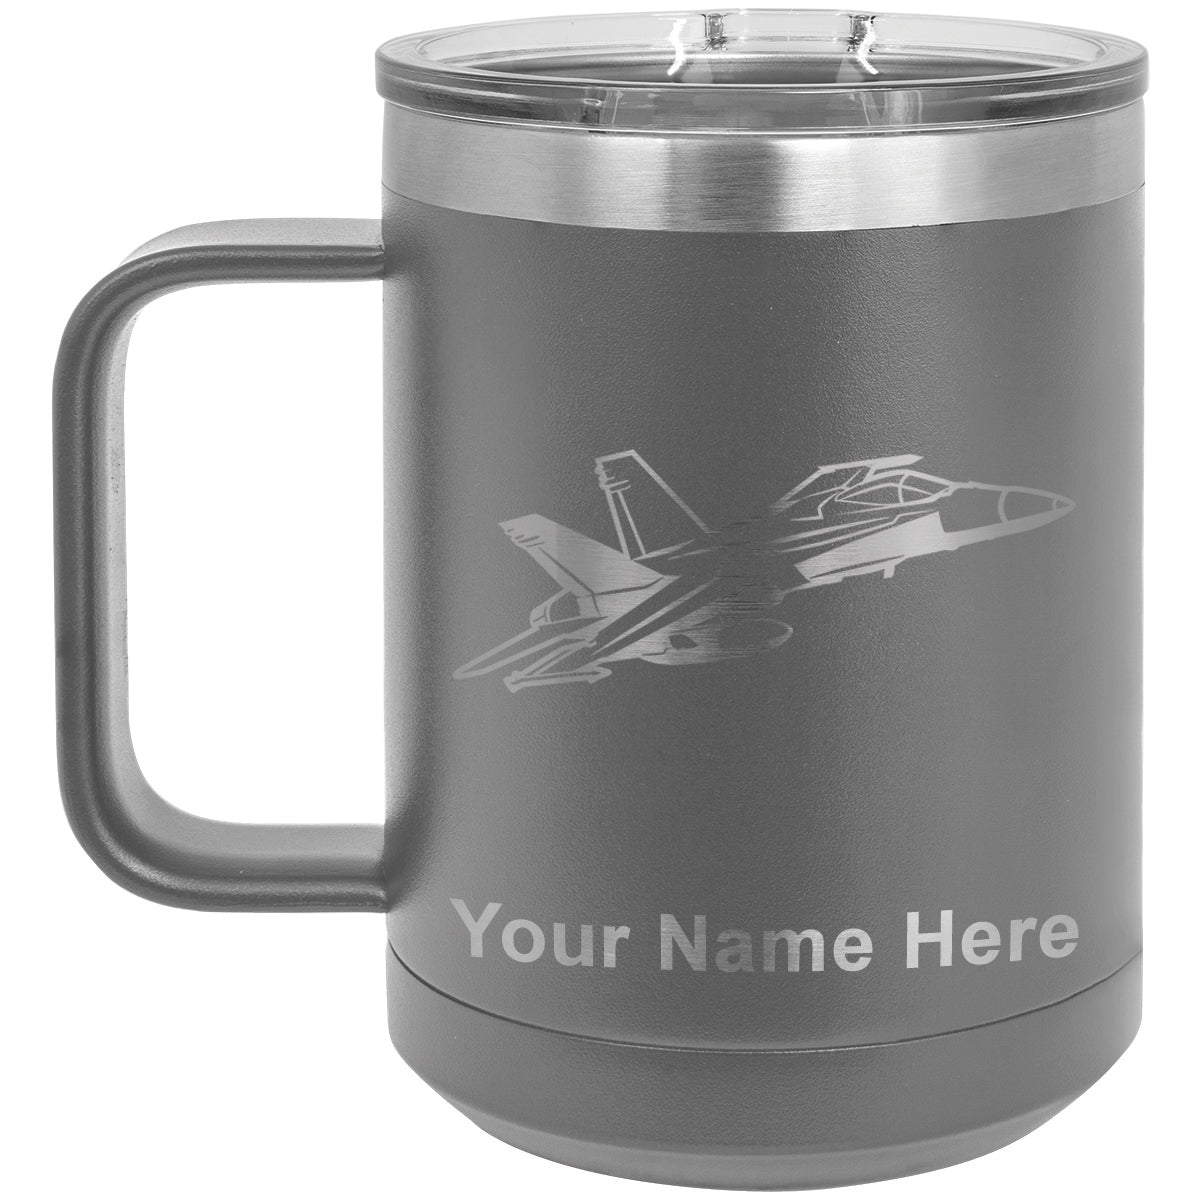 15oz Vacuum Insulated Coffee Mug, Fighter Jet 2, Personalized Engraving Included